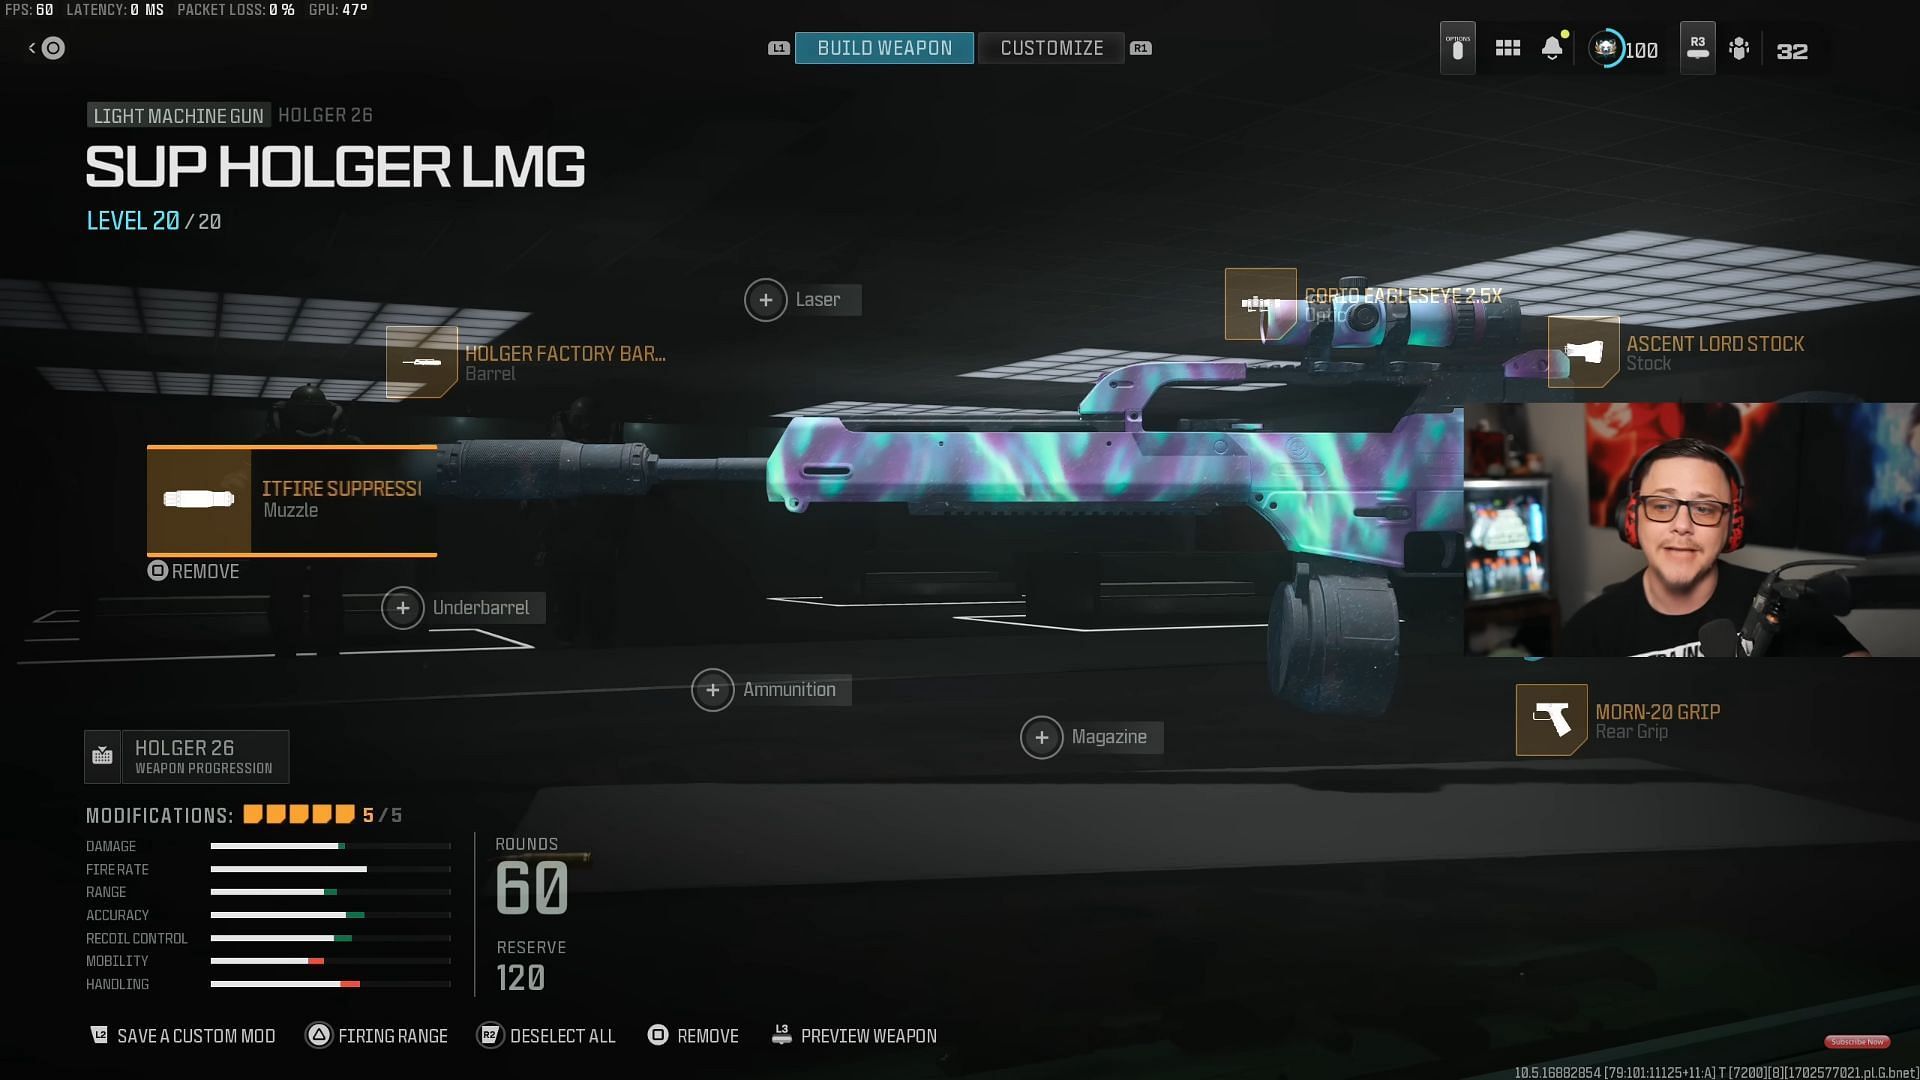 Holger 26 attachments (Image via Activision and YouTube/JGOD)